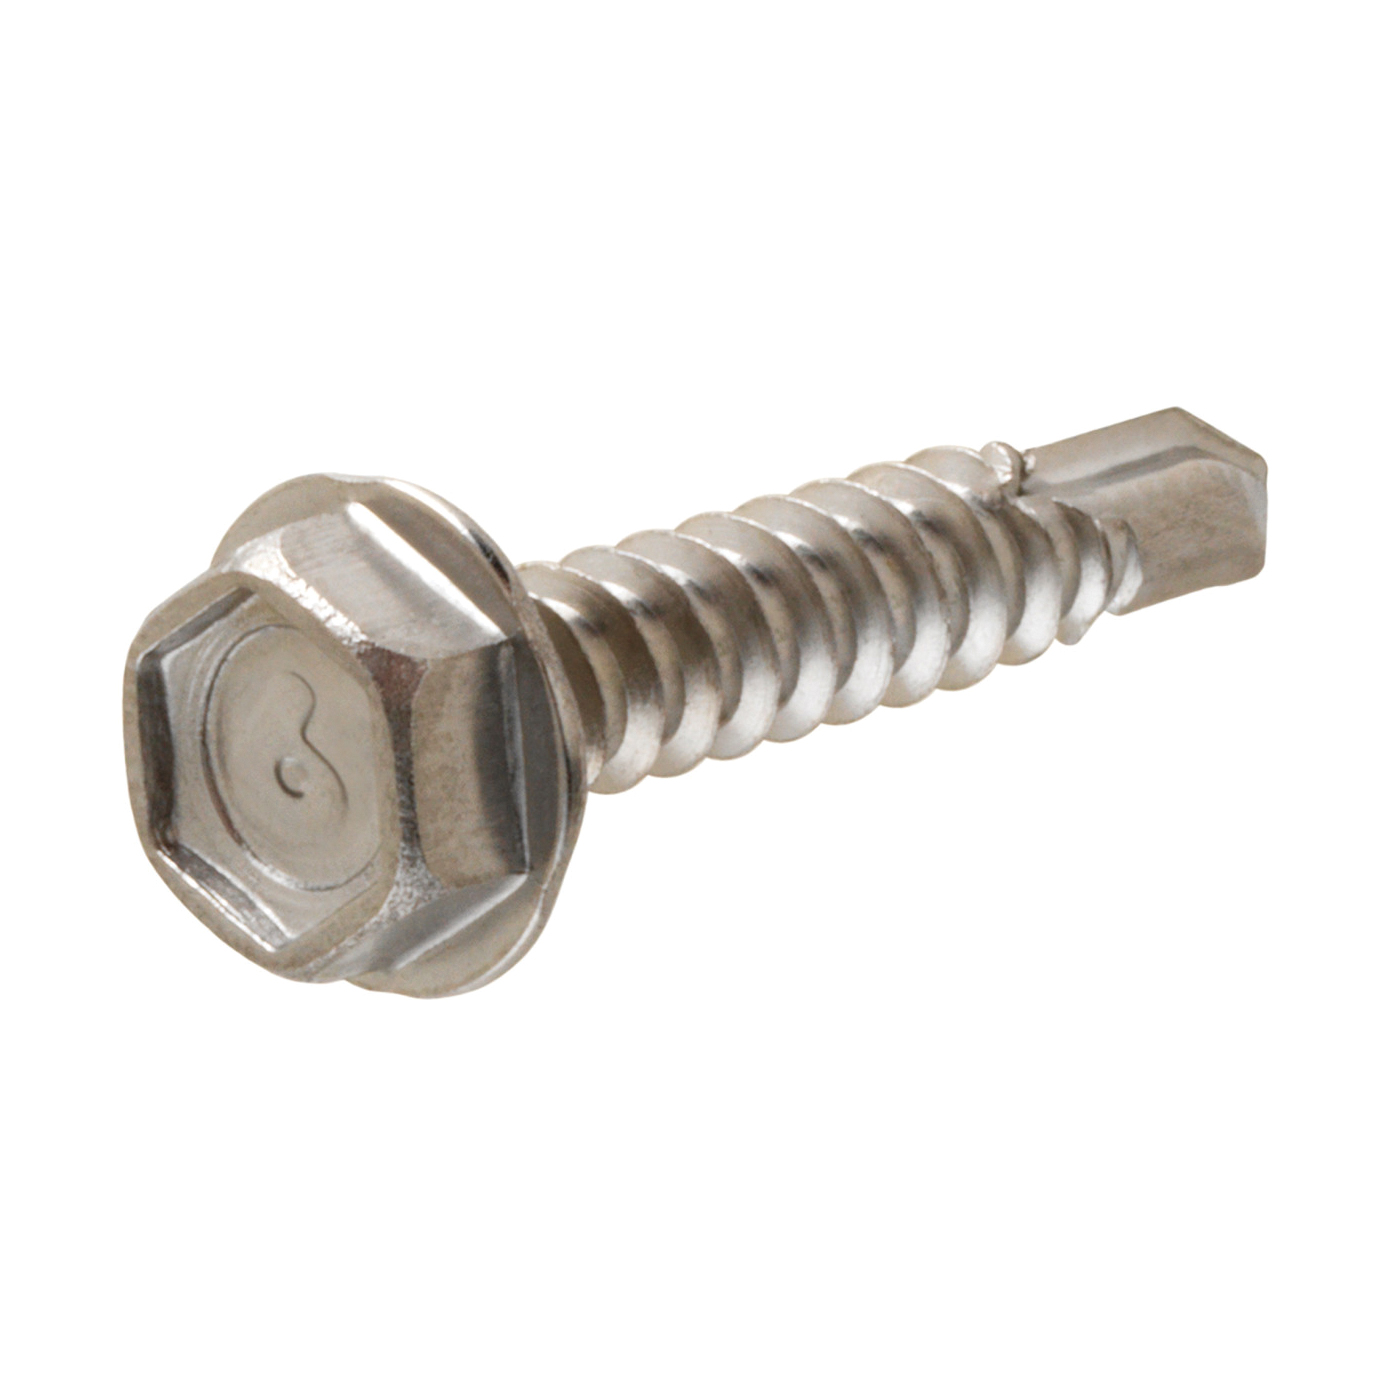 881847 Screw, #14 Thread, 2 in L, Coarse Thread, Washer Head, Hex Drive, Self-Drilling Point, Stainless Steel